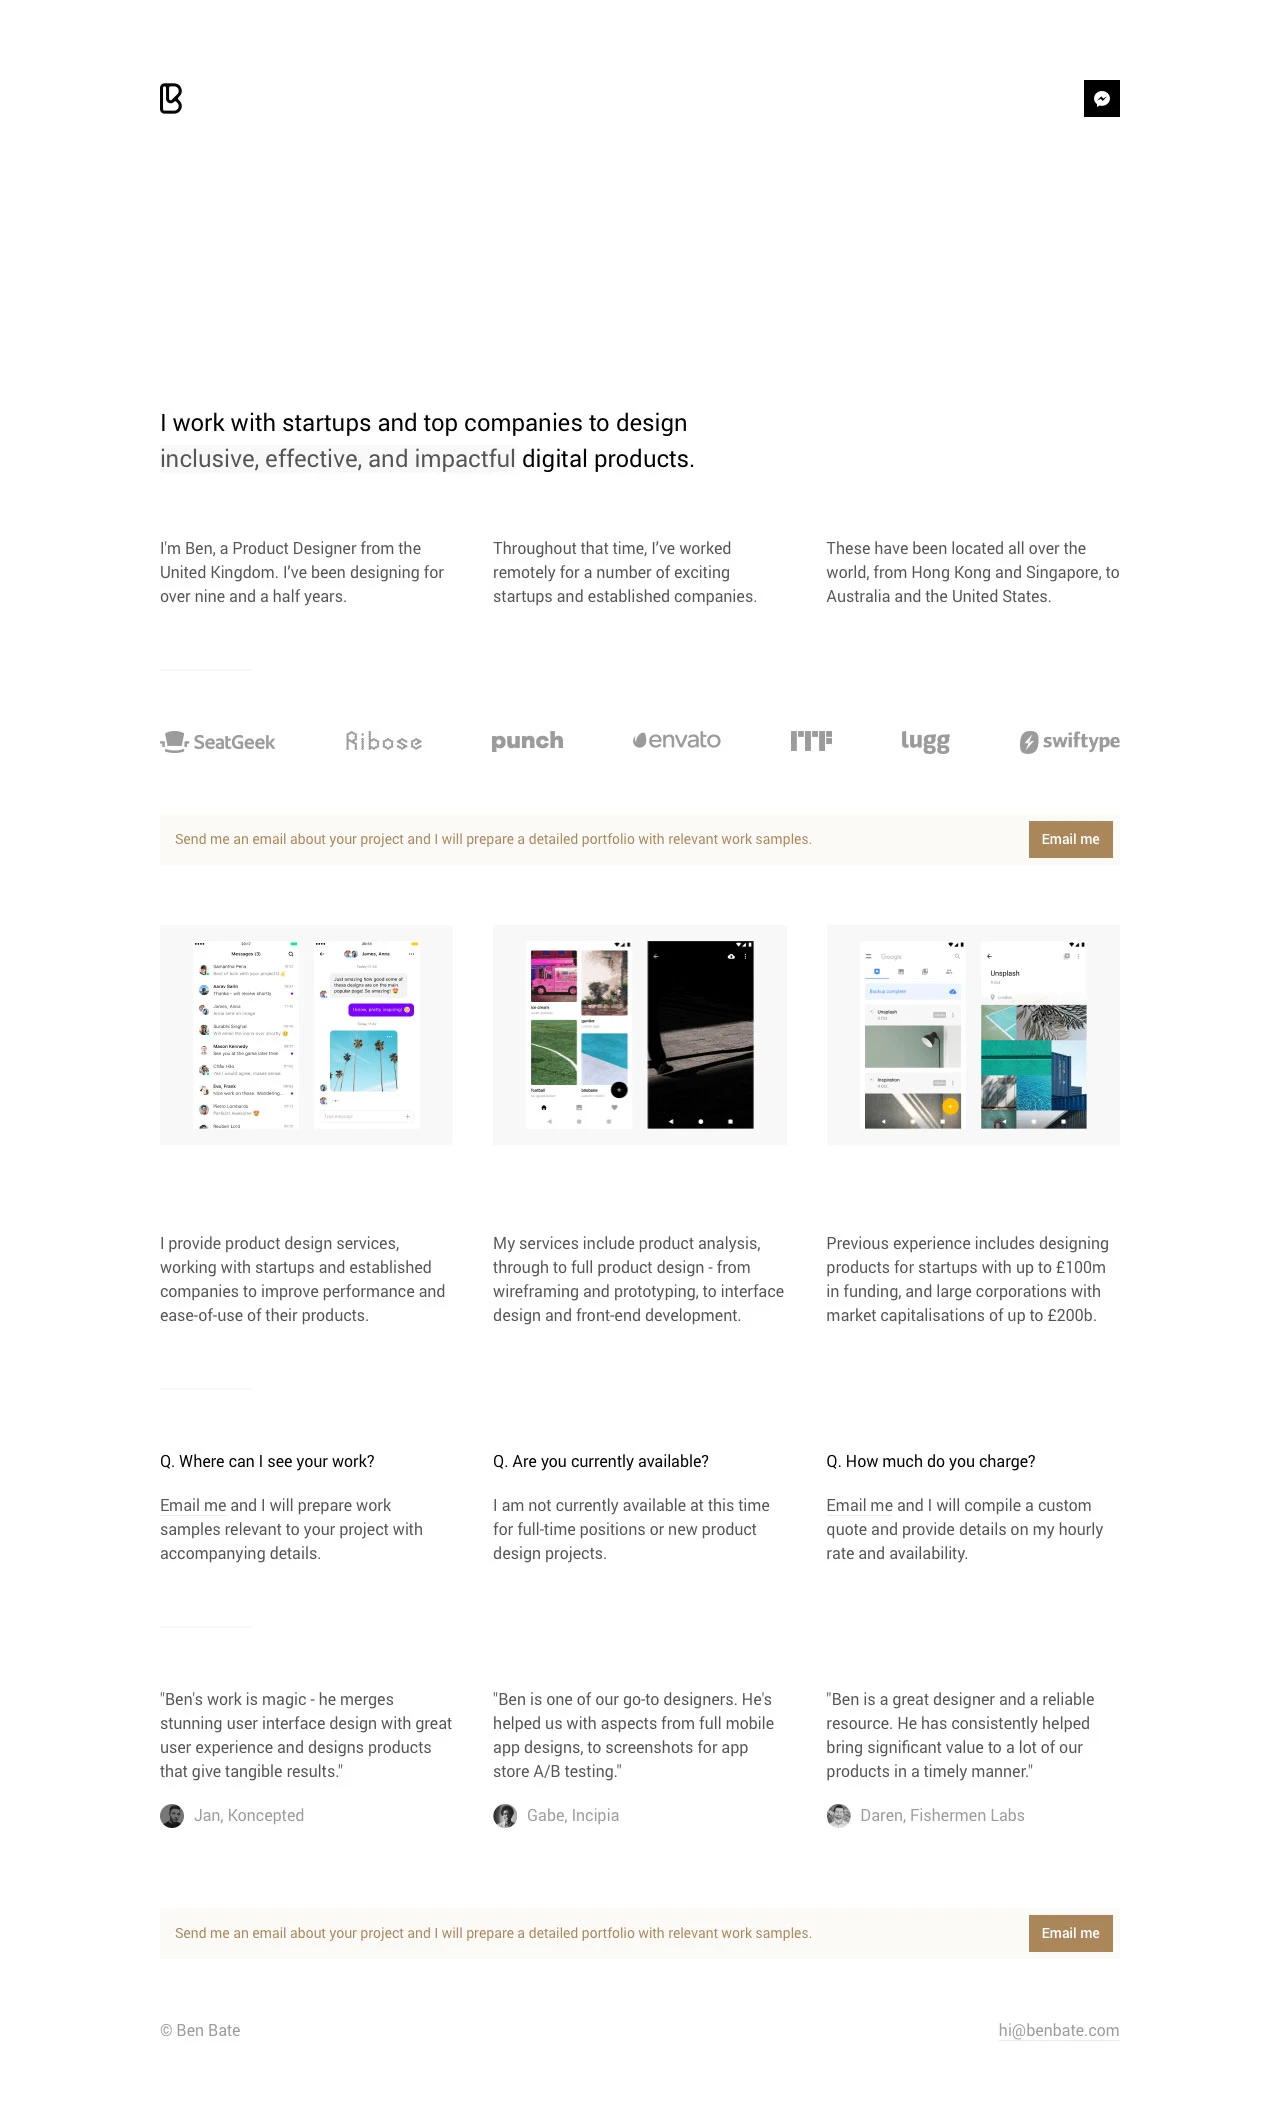 Ben Bate Landing Page Example: I work with startups and top companies to design inclusive, effective, and impactful digital products.